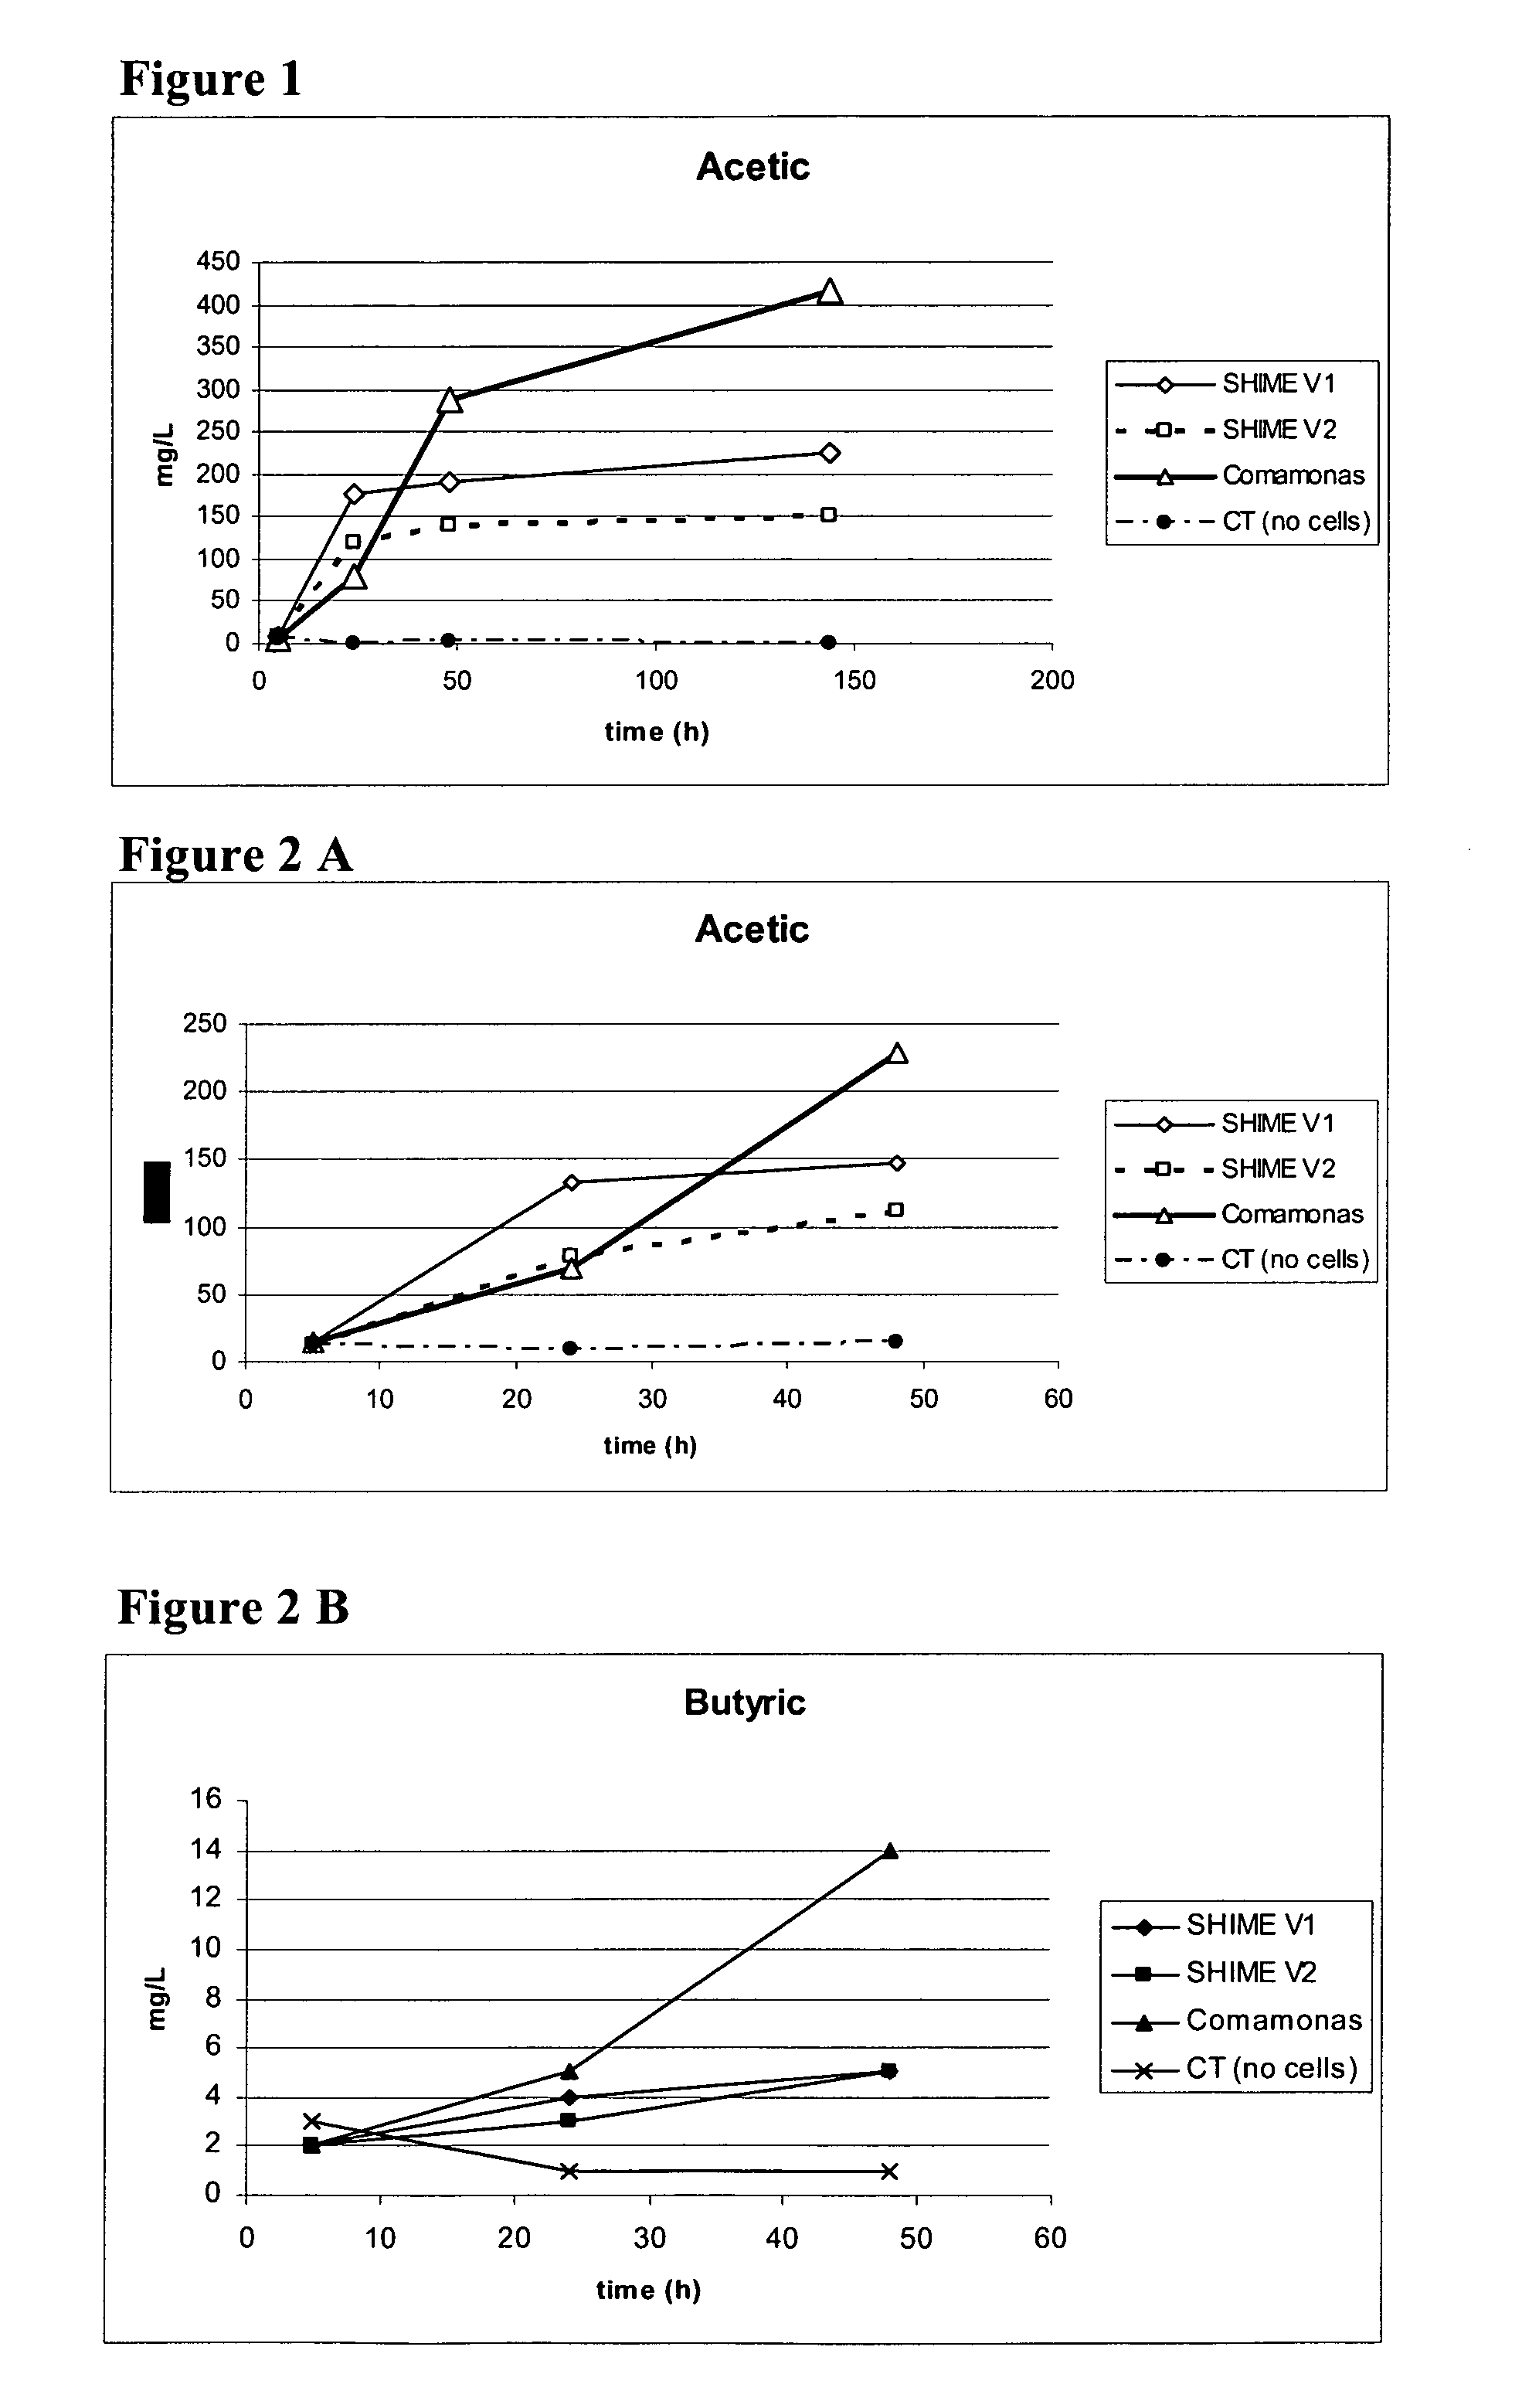 Hydroxybutyrate and poly-hydroxybutyrate as components of animal feed or feed additives